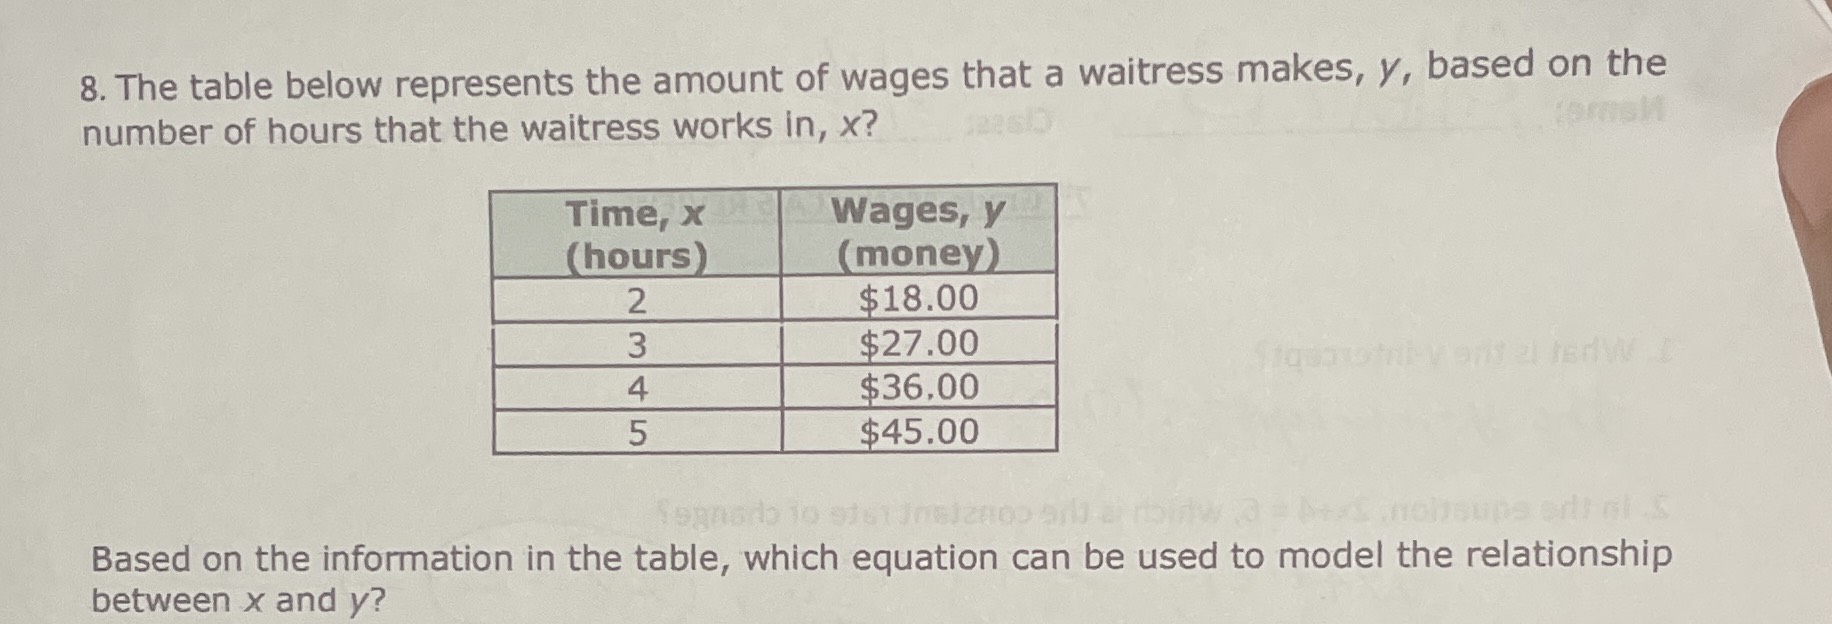 8. The table below represents the amount of wages ...